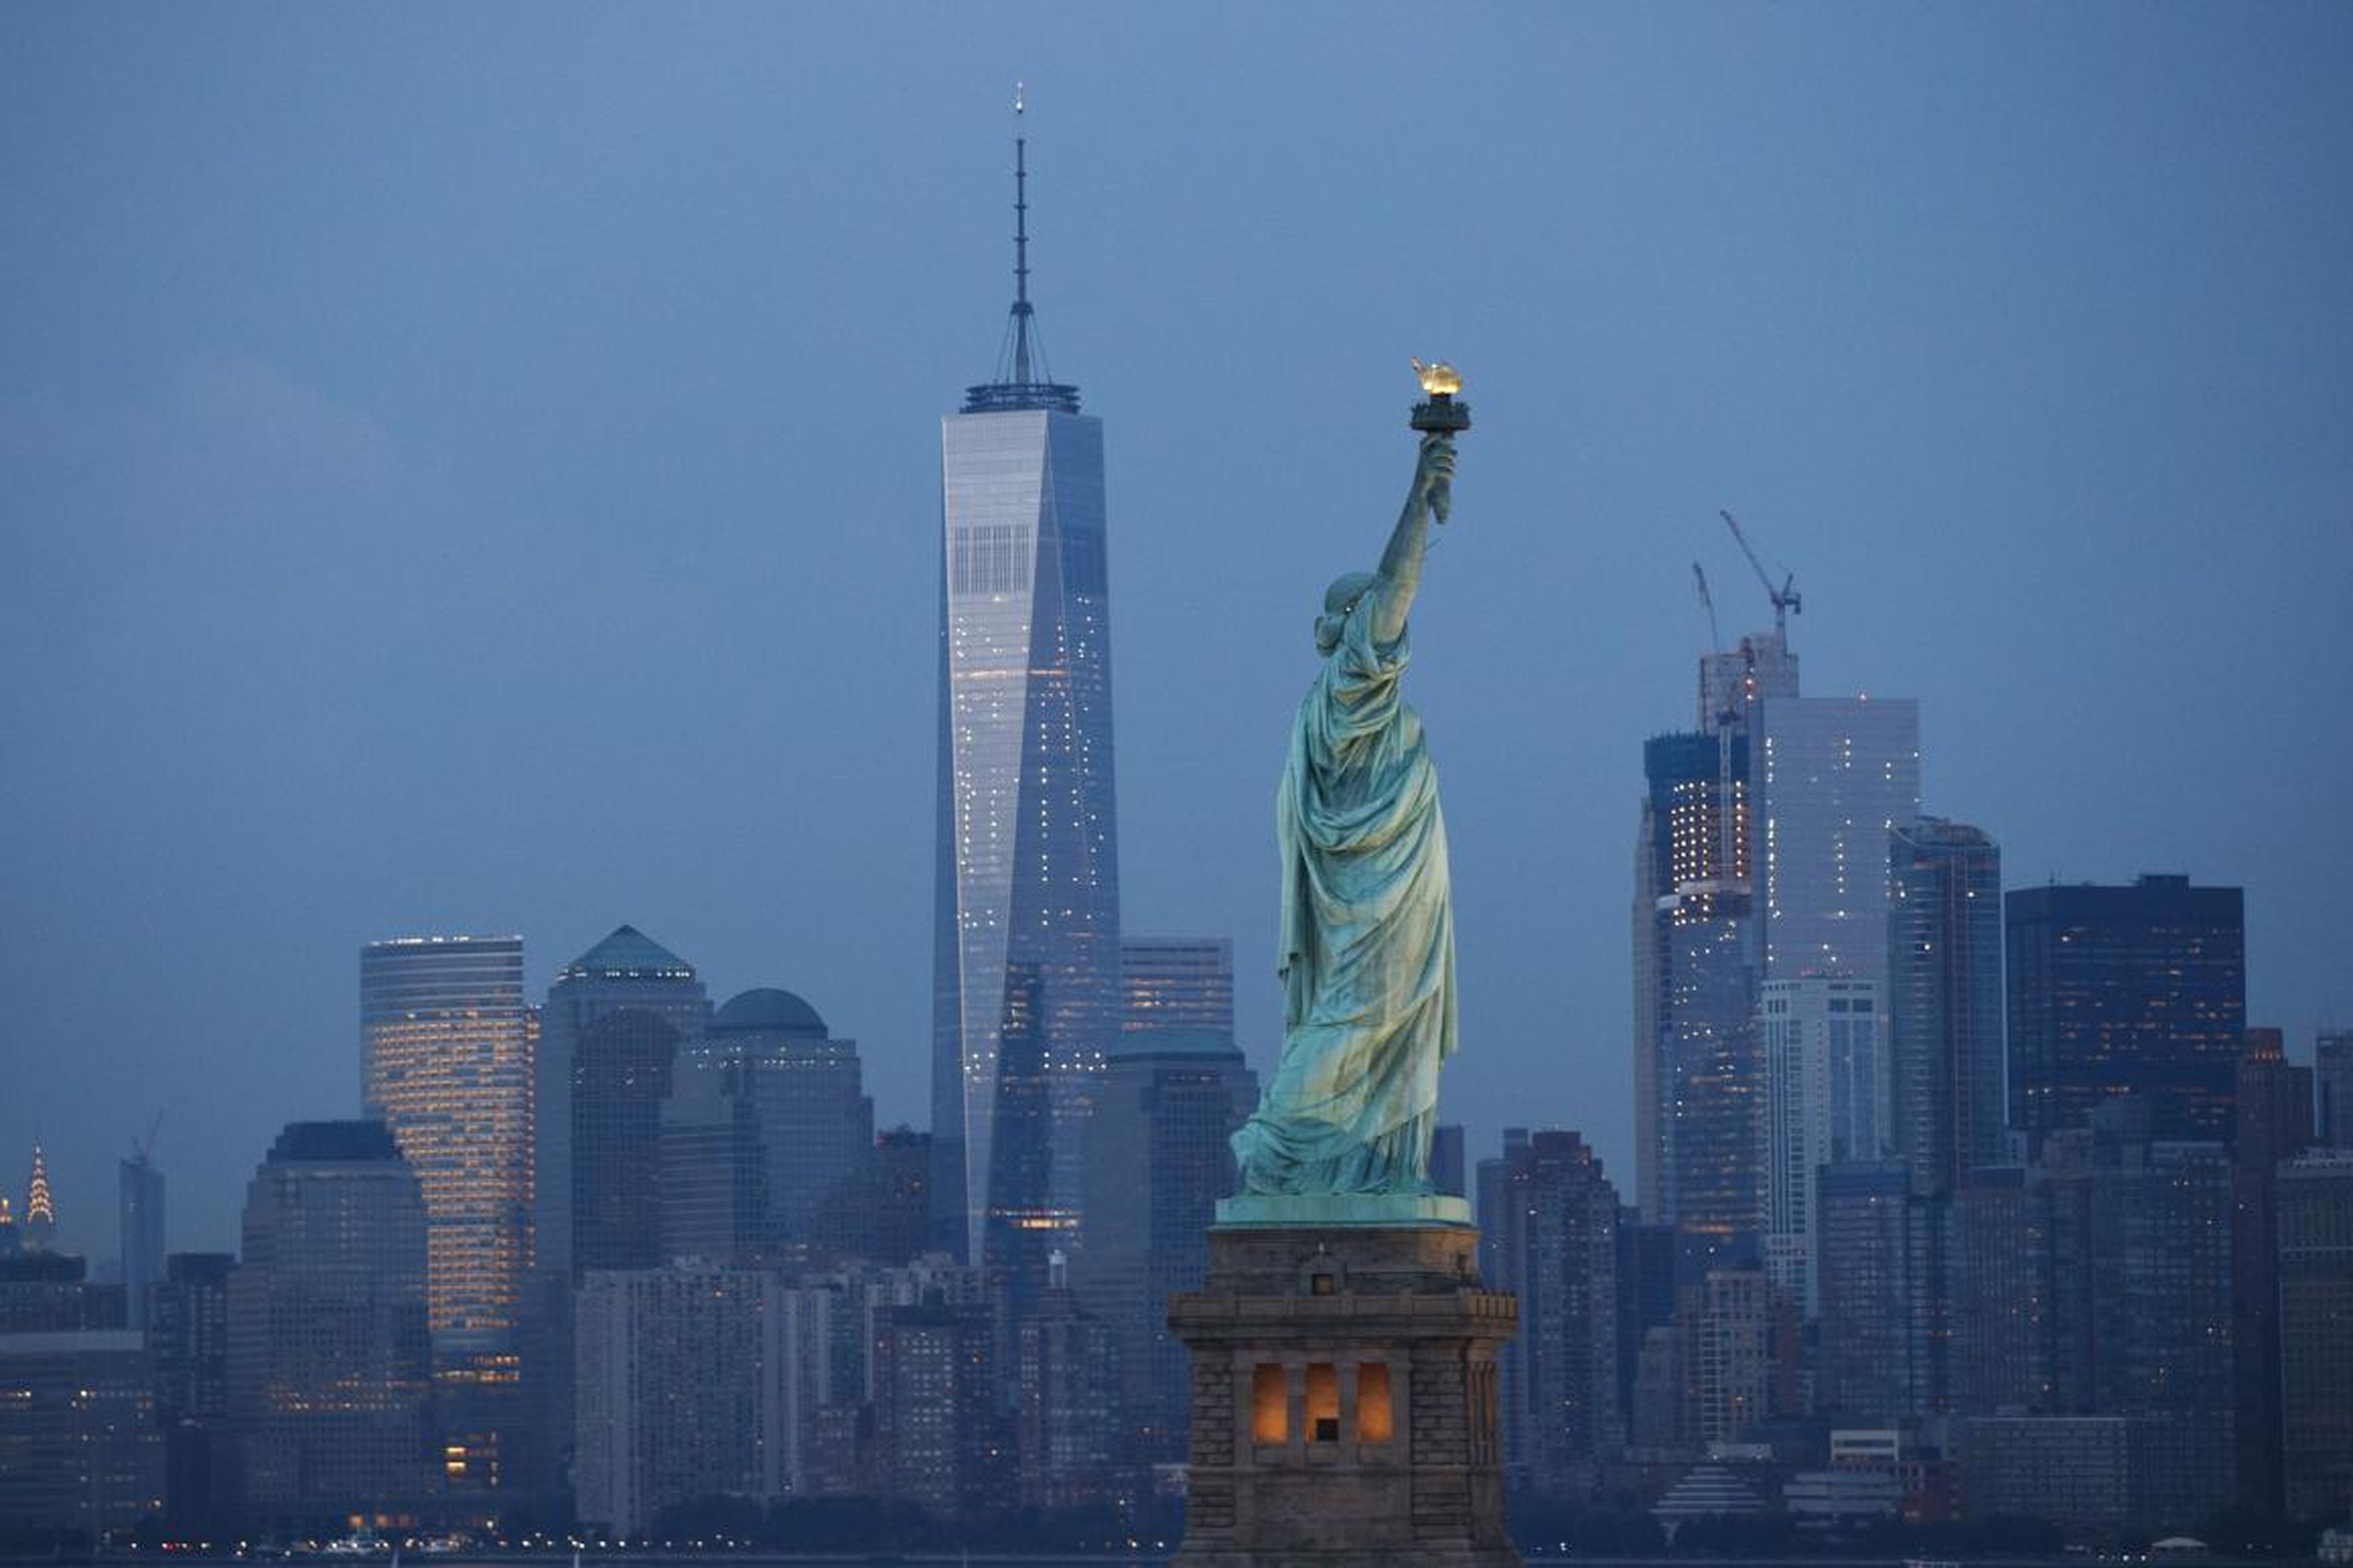 3. New York City is the most populous city in the United States, with an estimated population of 8.6 million people.